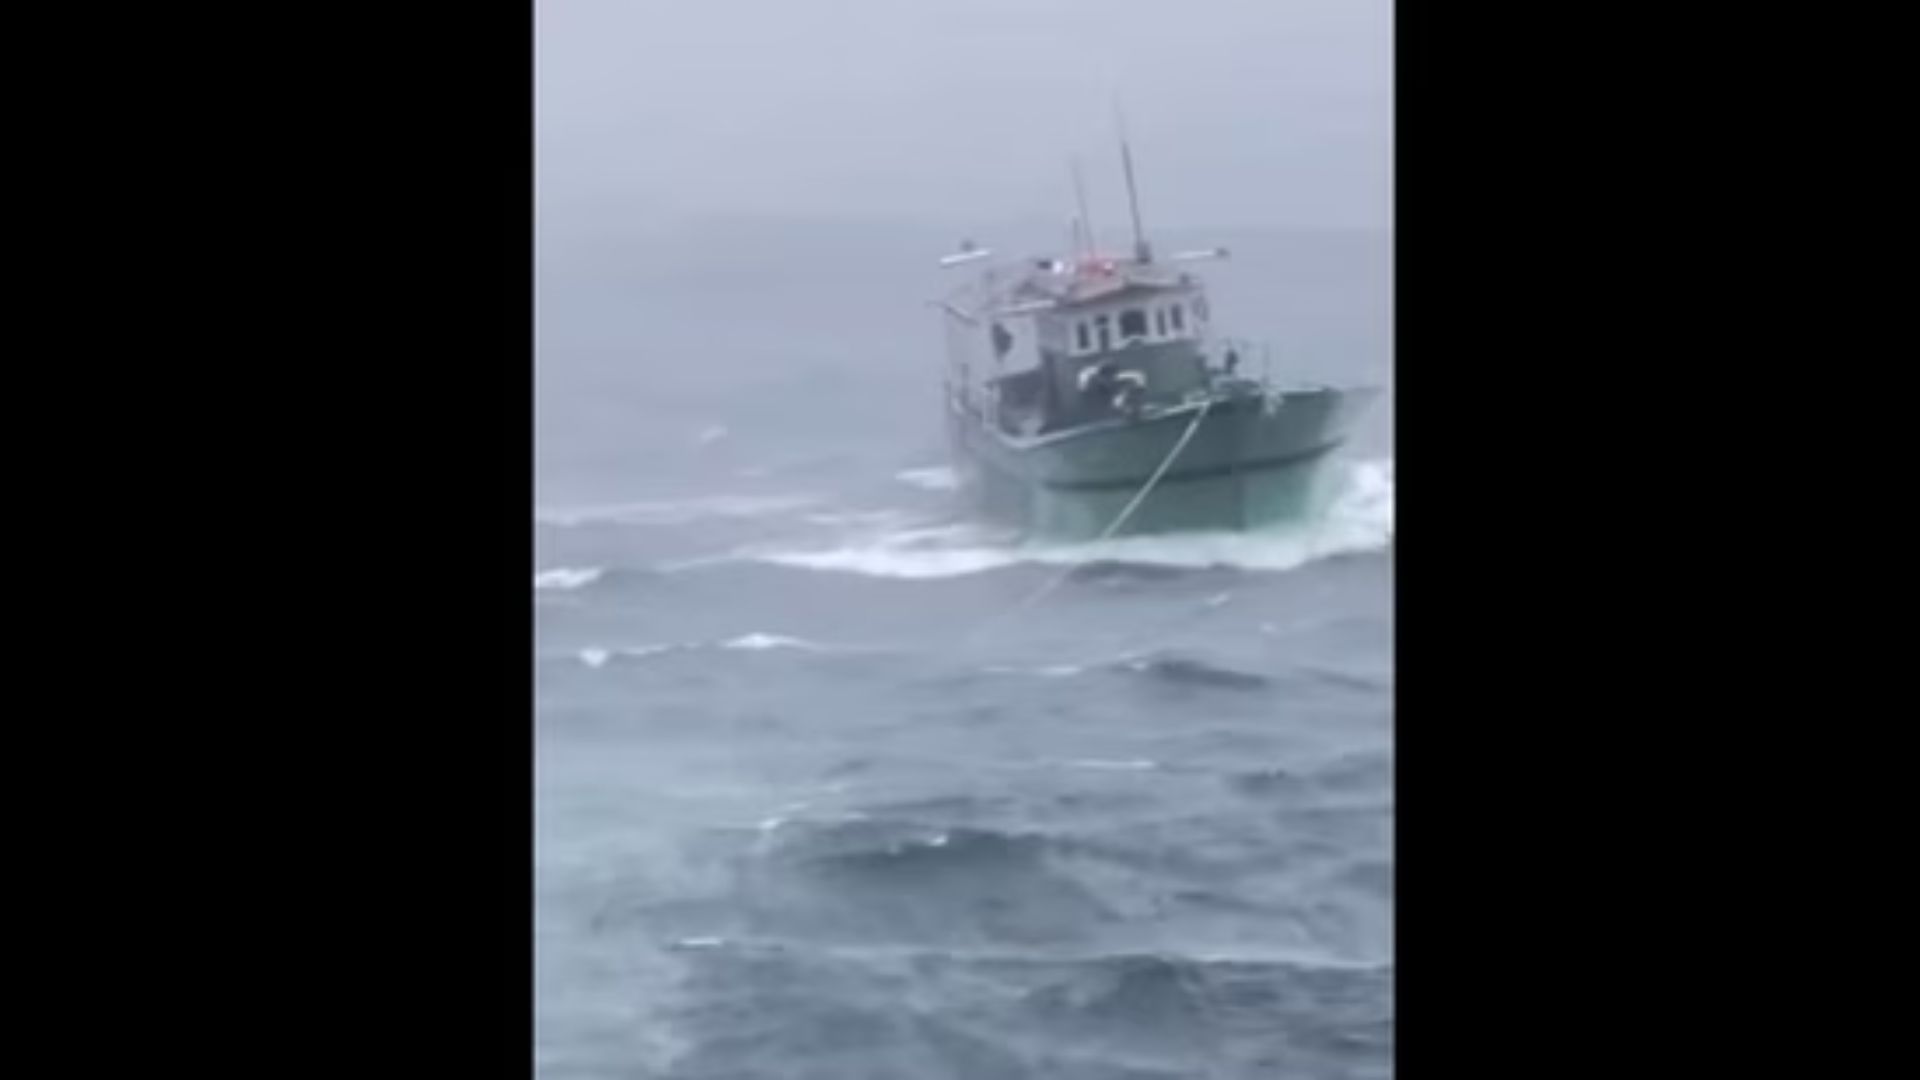 Watch: Indian Coast Guard Rescues Stranded Boat In Harrowing Weather Conditions